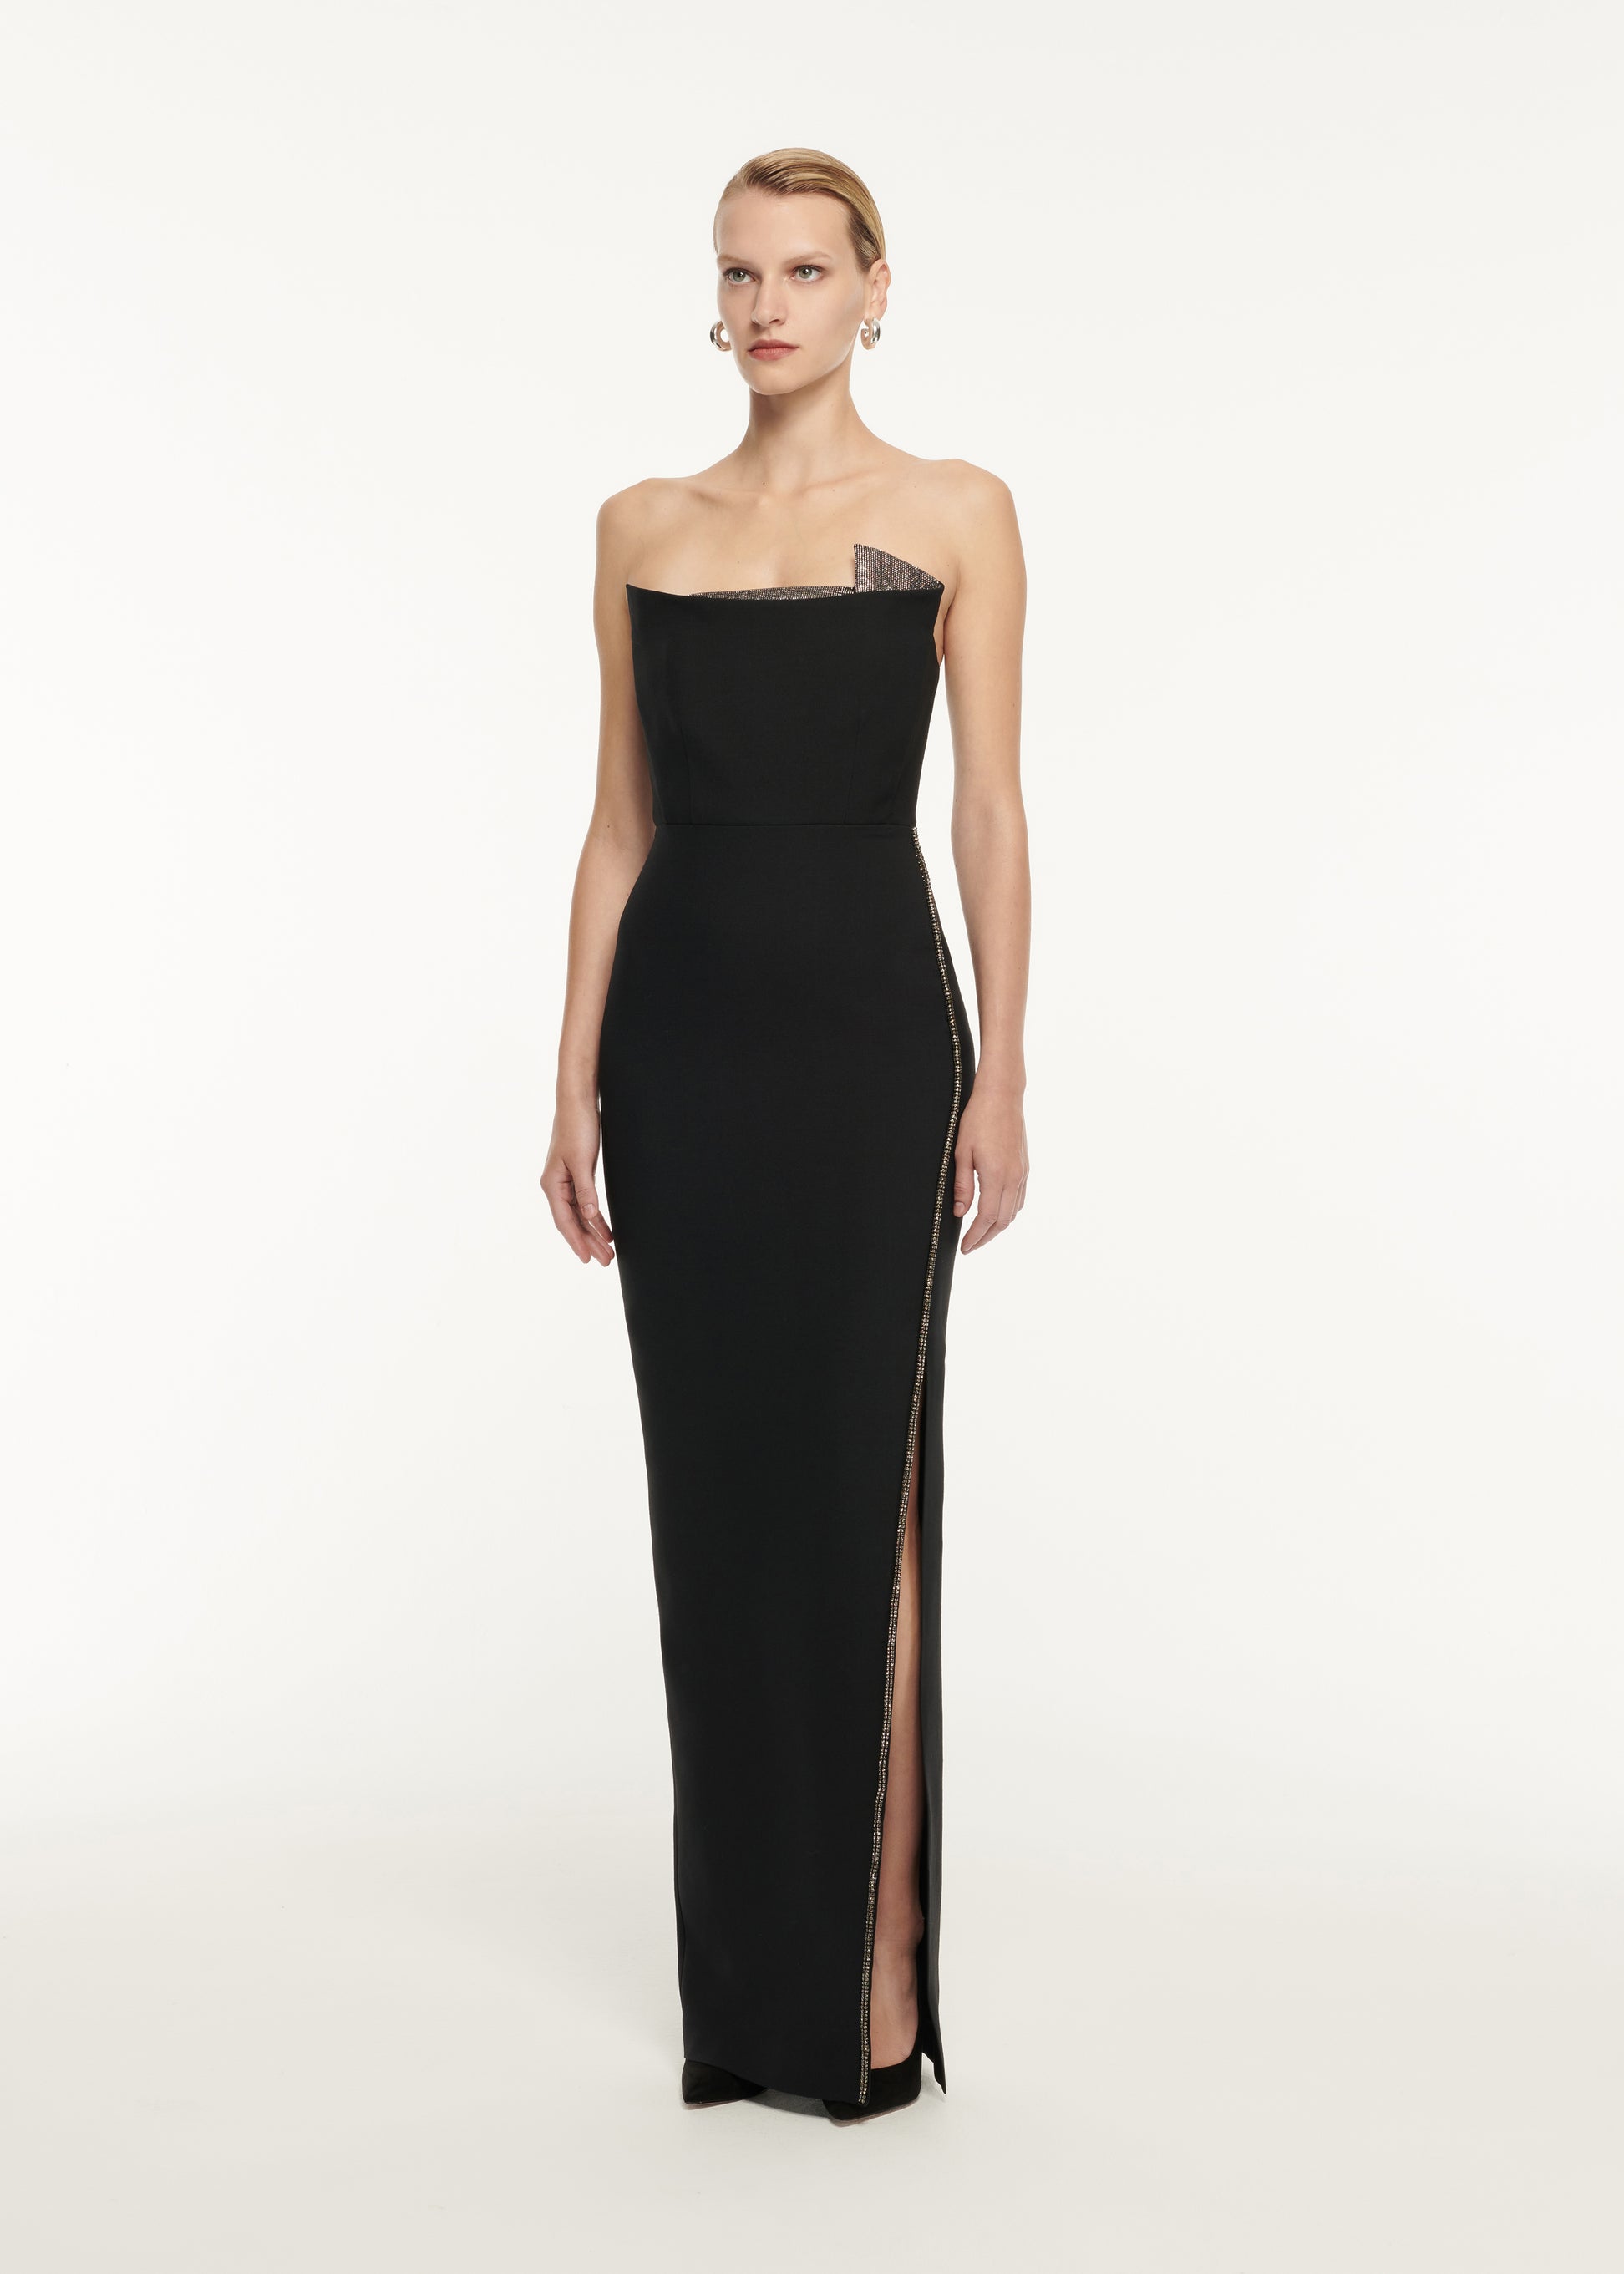 A woman wearing the Strapless Wool Silk Embellished Maxi Dress